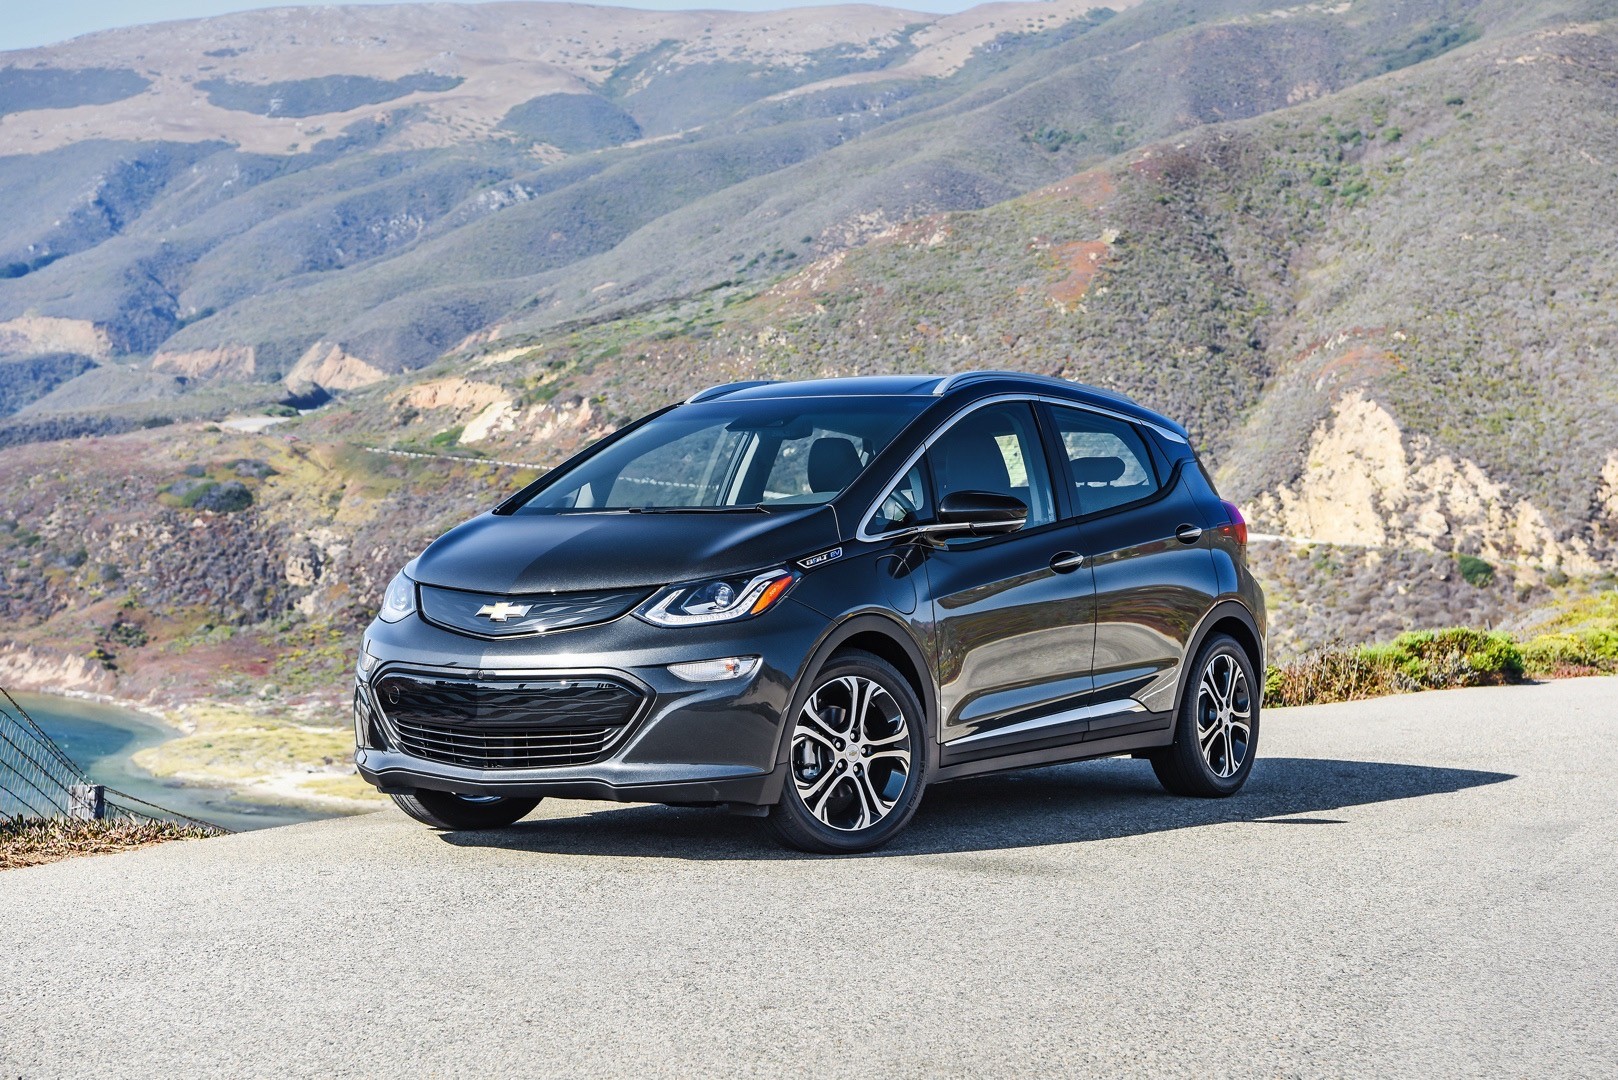 2017 chevrolet bolt price starts from after federal tax credit